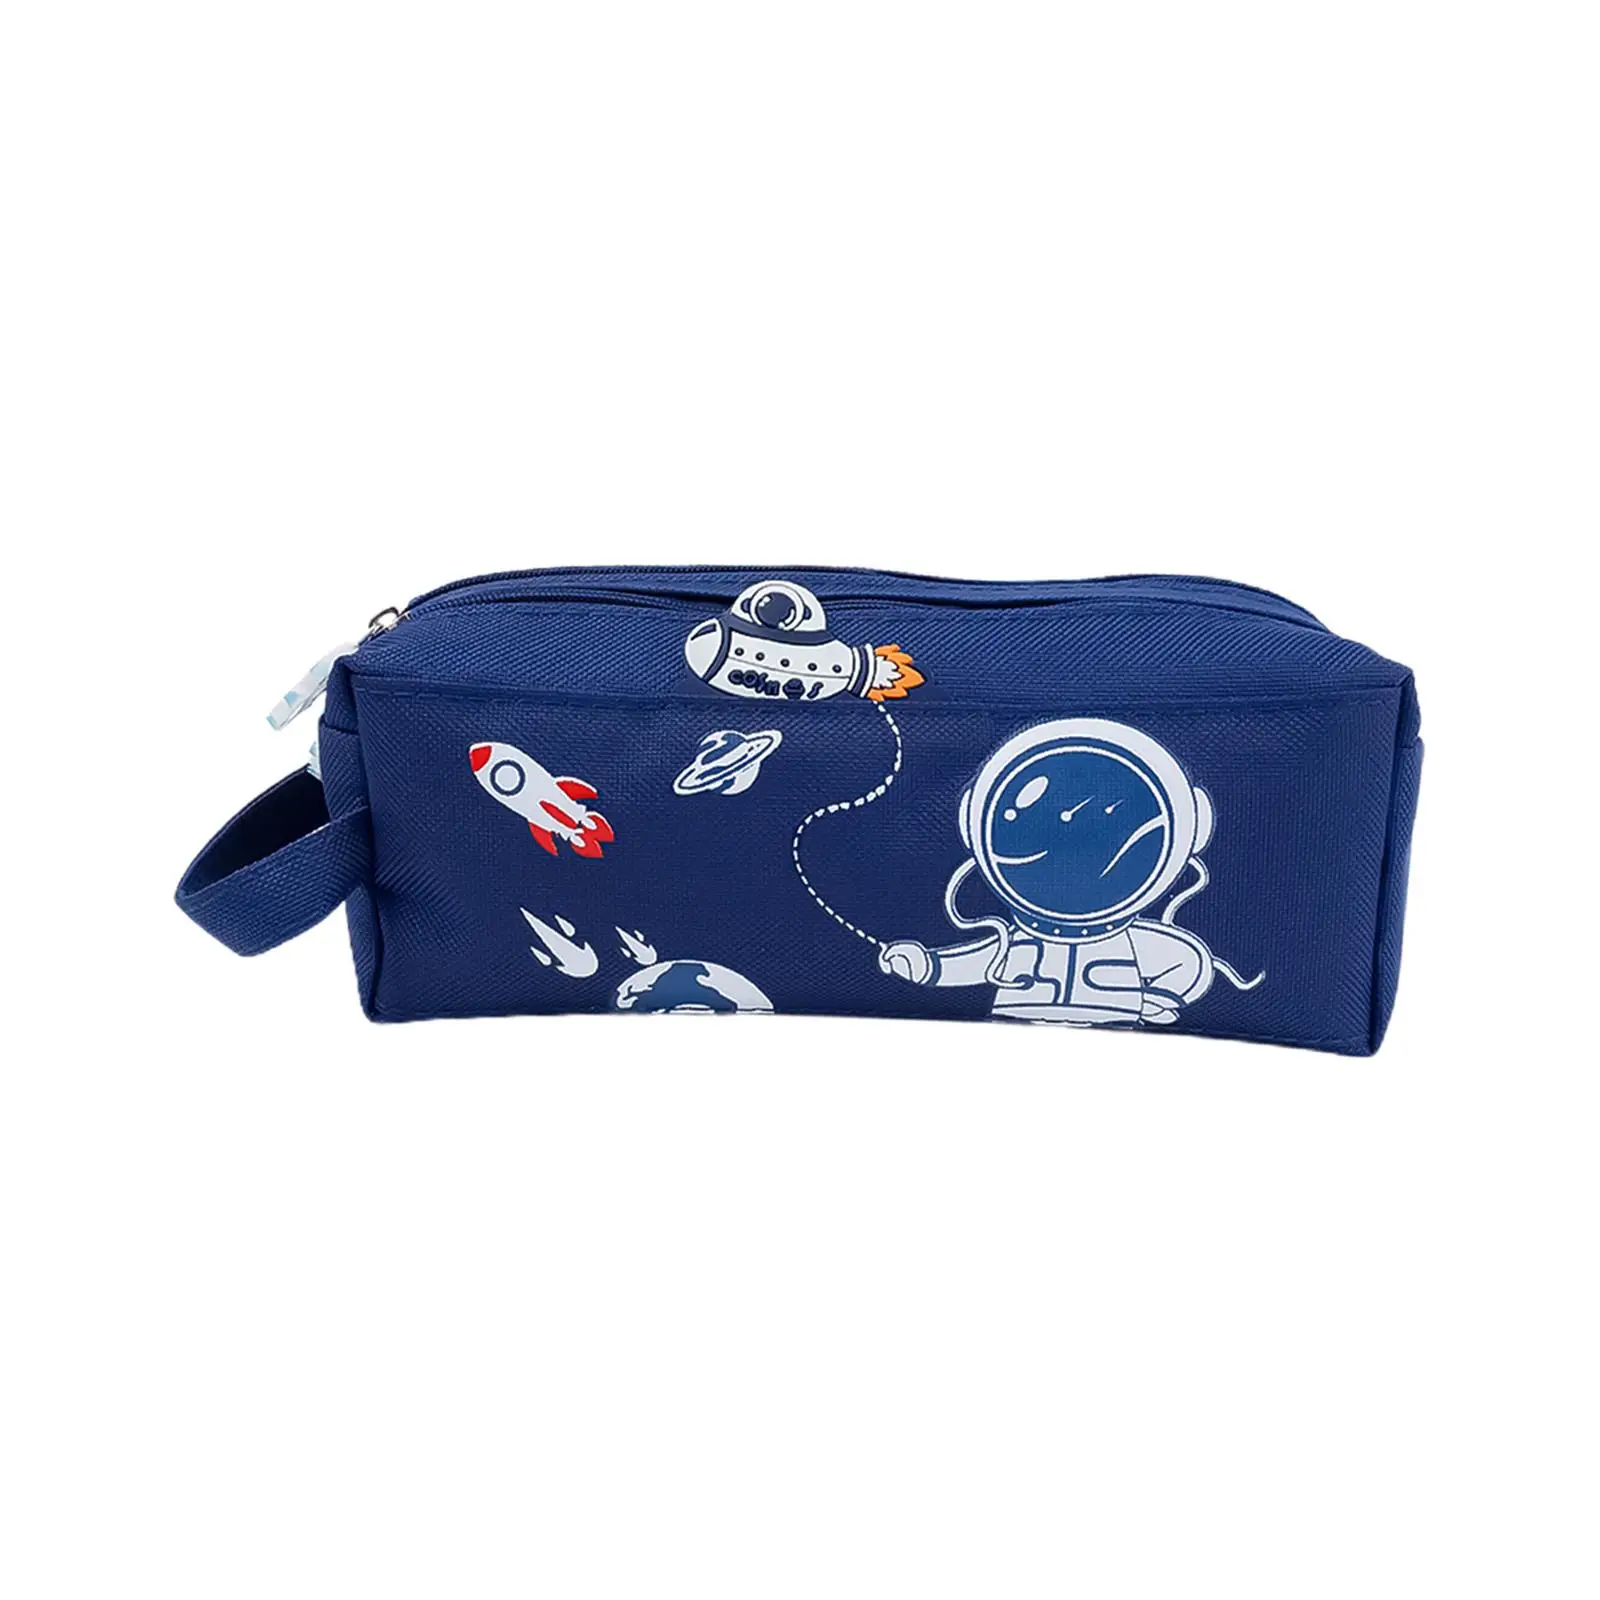 Hanging Astronaut Pencil Case Makeup Pouch Double Layer Oxford Cloth for Travel Outgoing